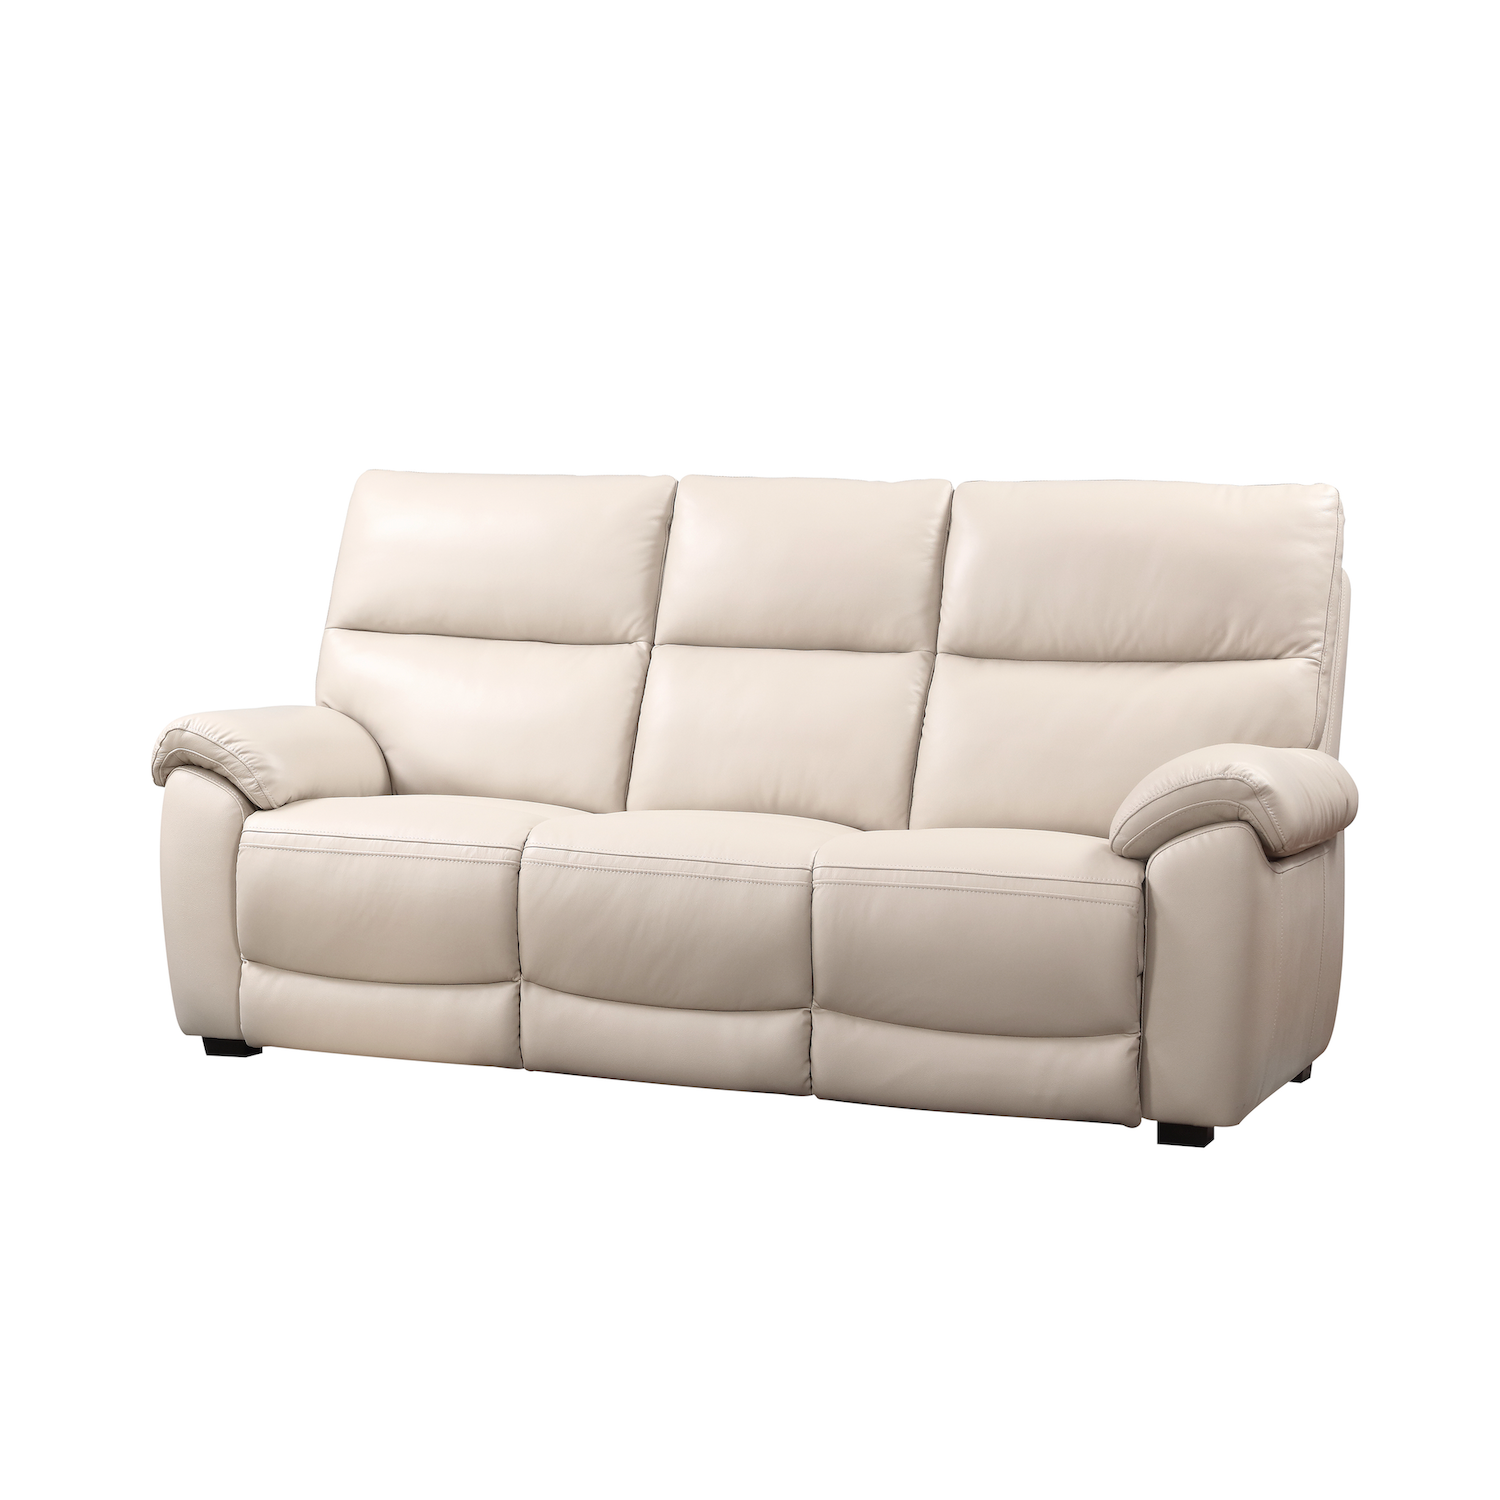 Rocco 3 Seater Static Sofa Chalk Leather